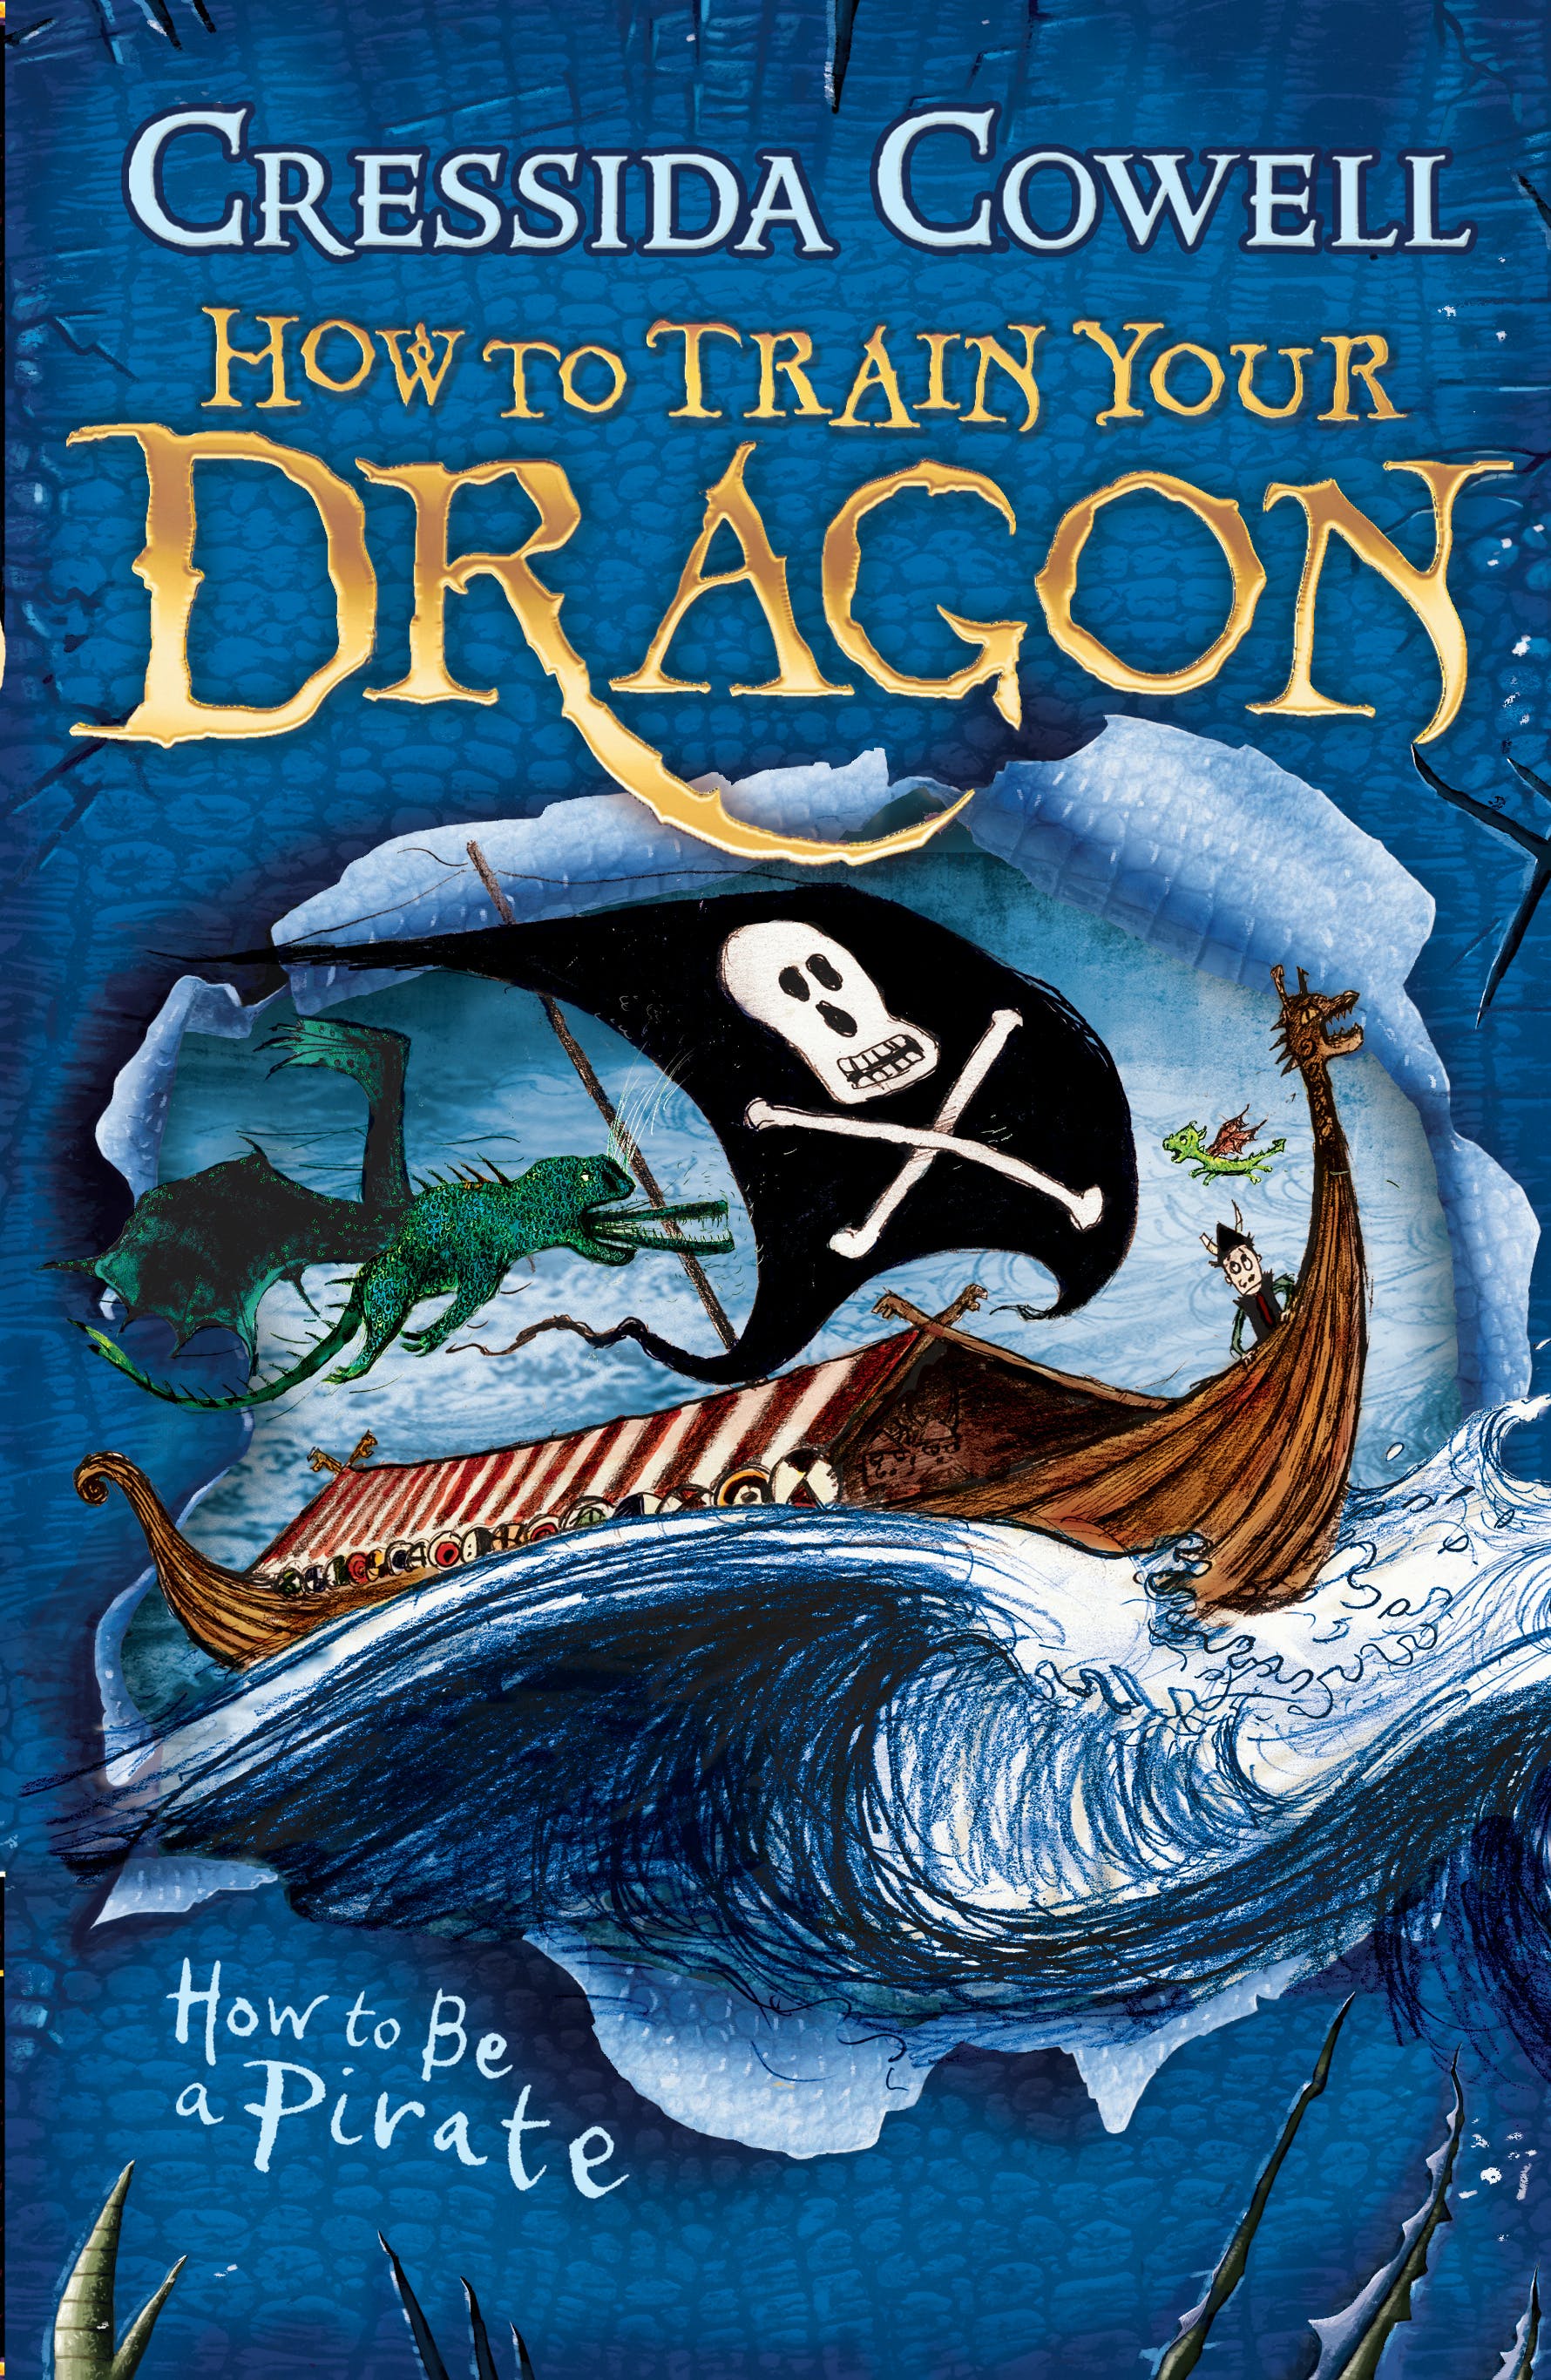 How To Train Your Dragon: How to be a Pirate